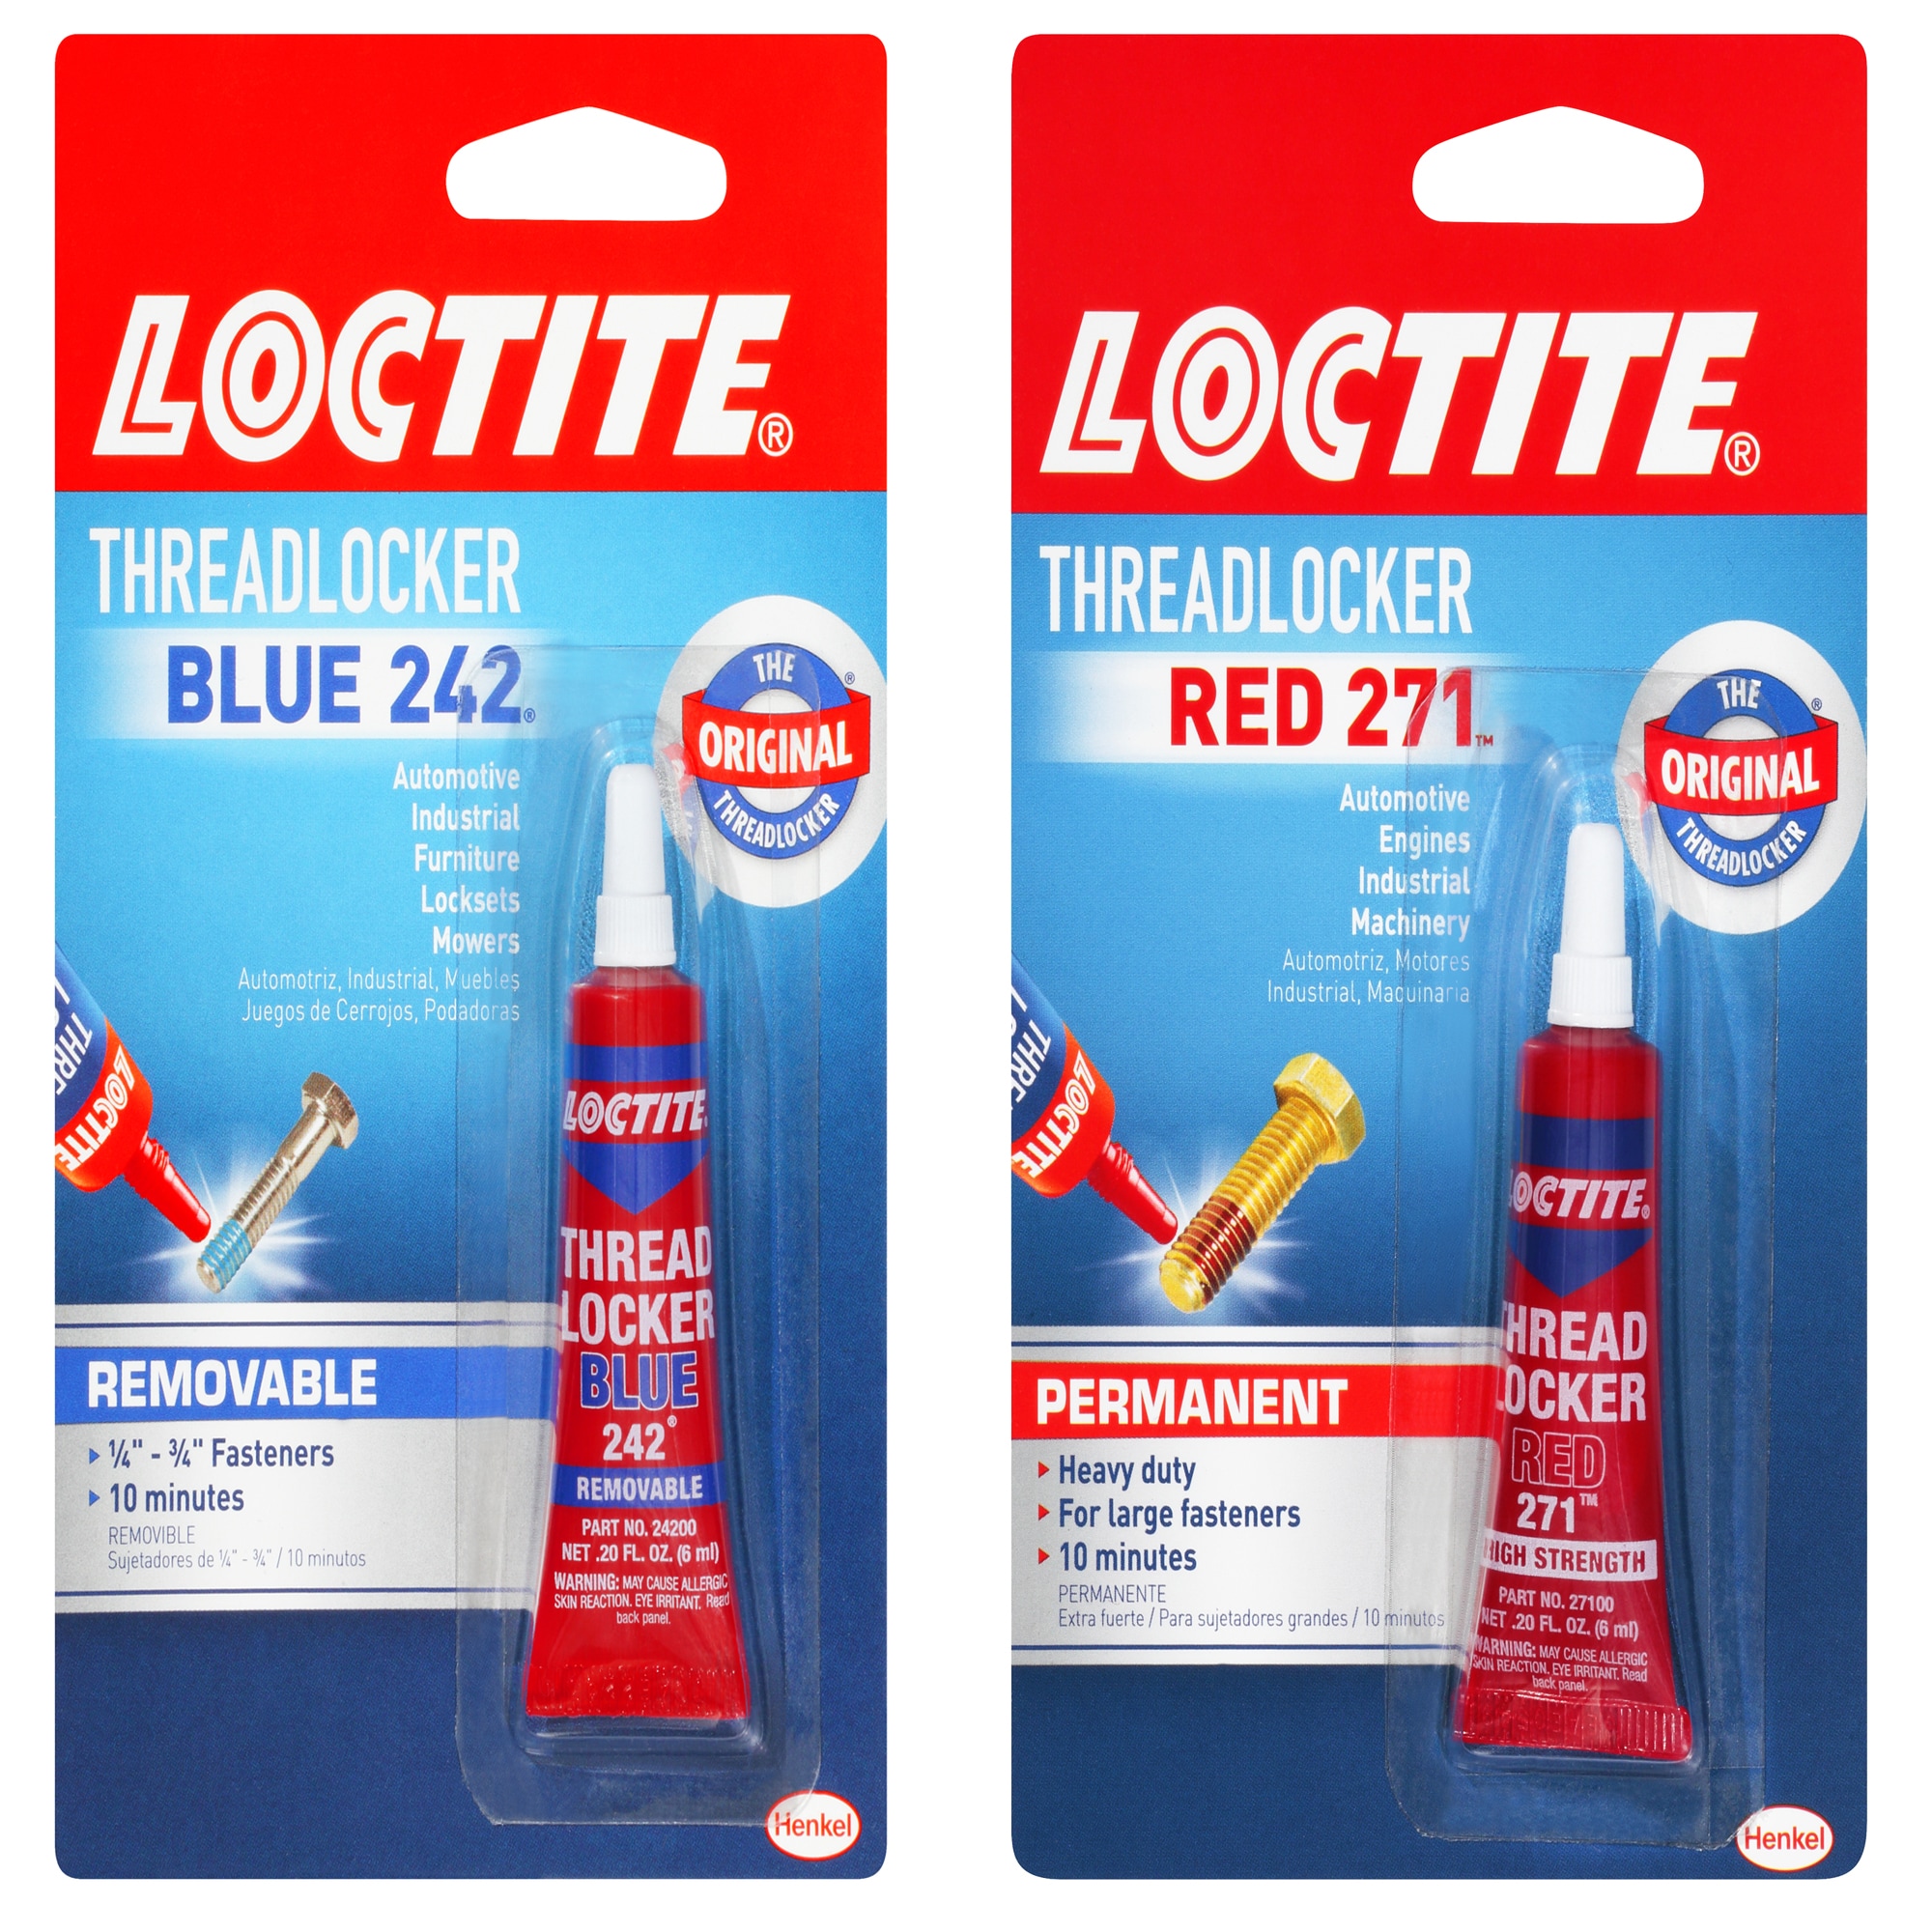 What is the difference between Loctite threadlocker colors